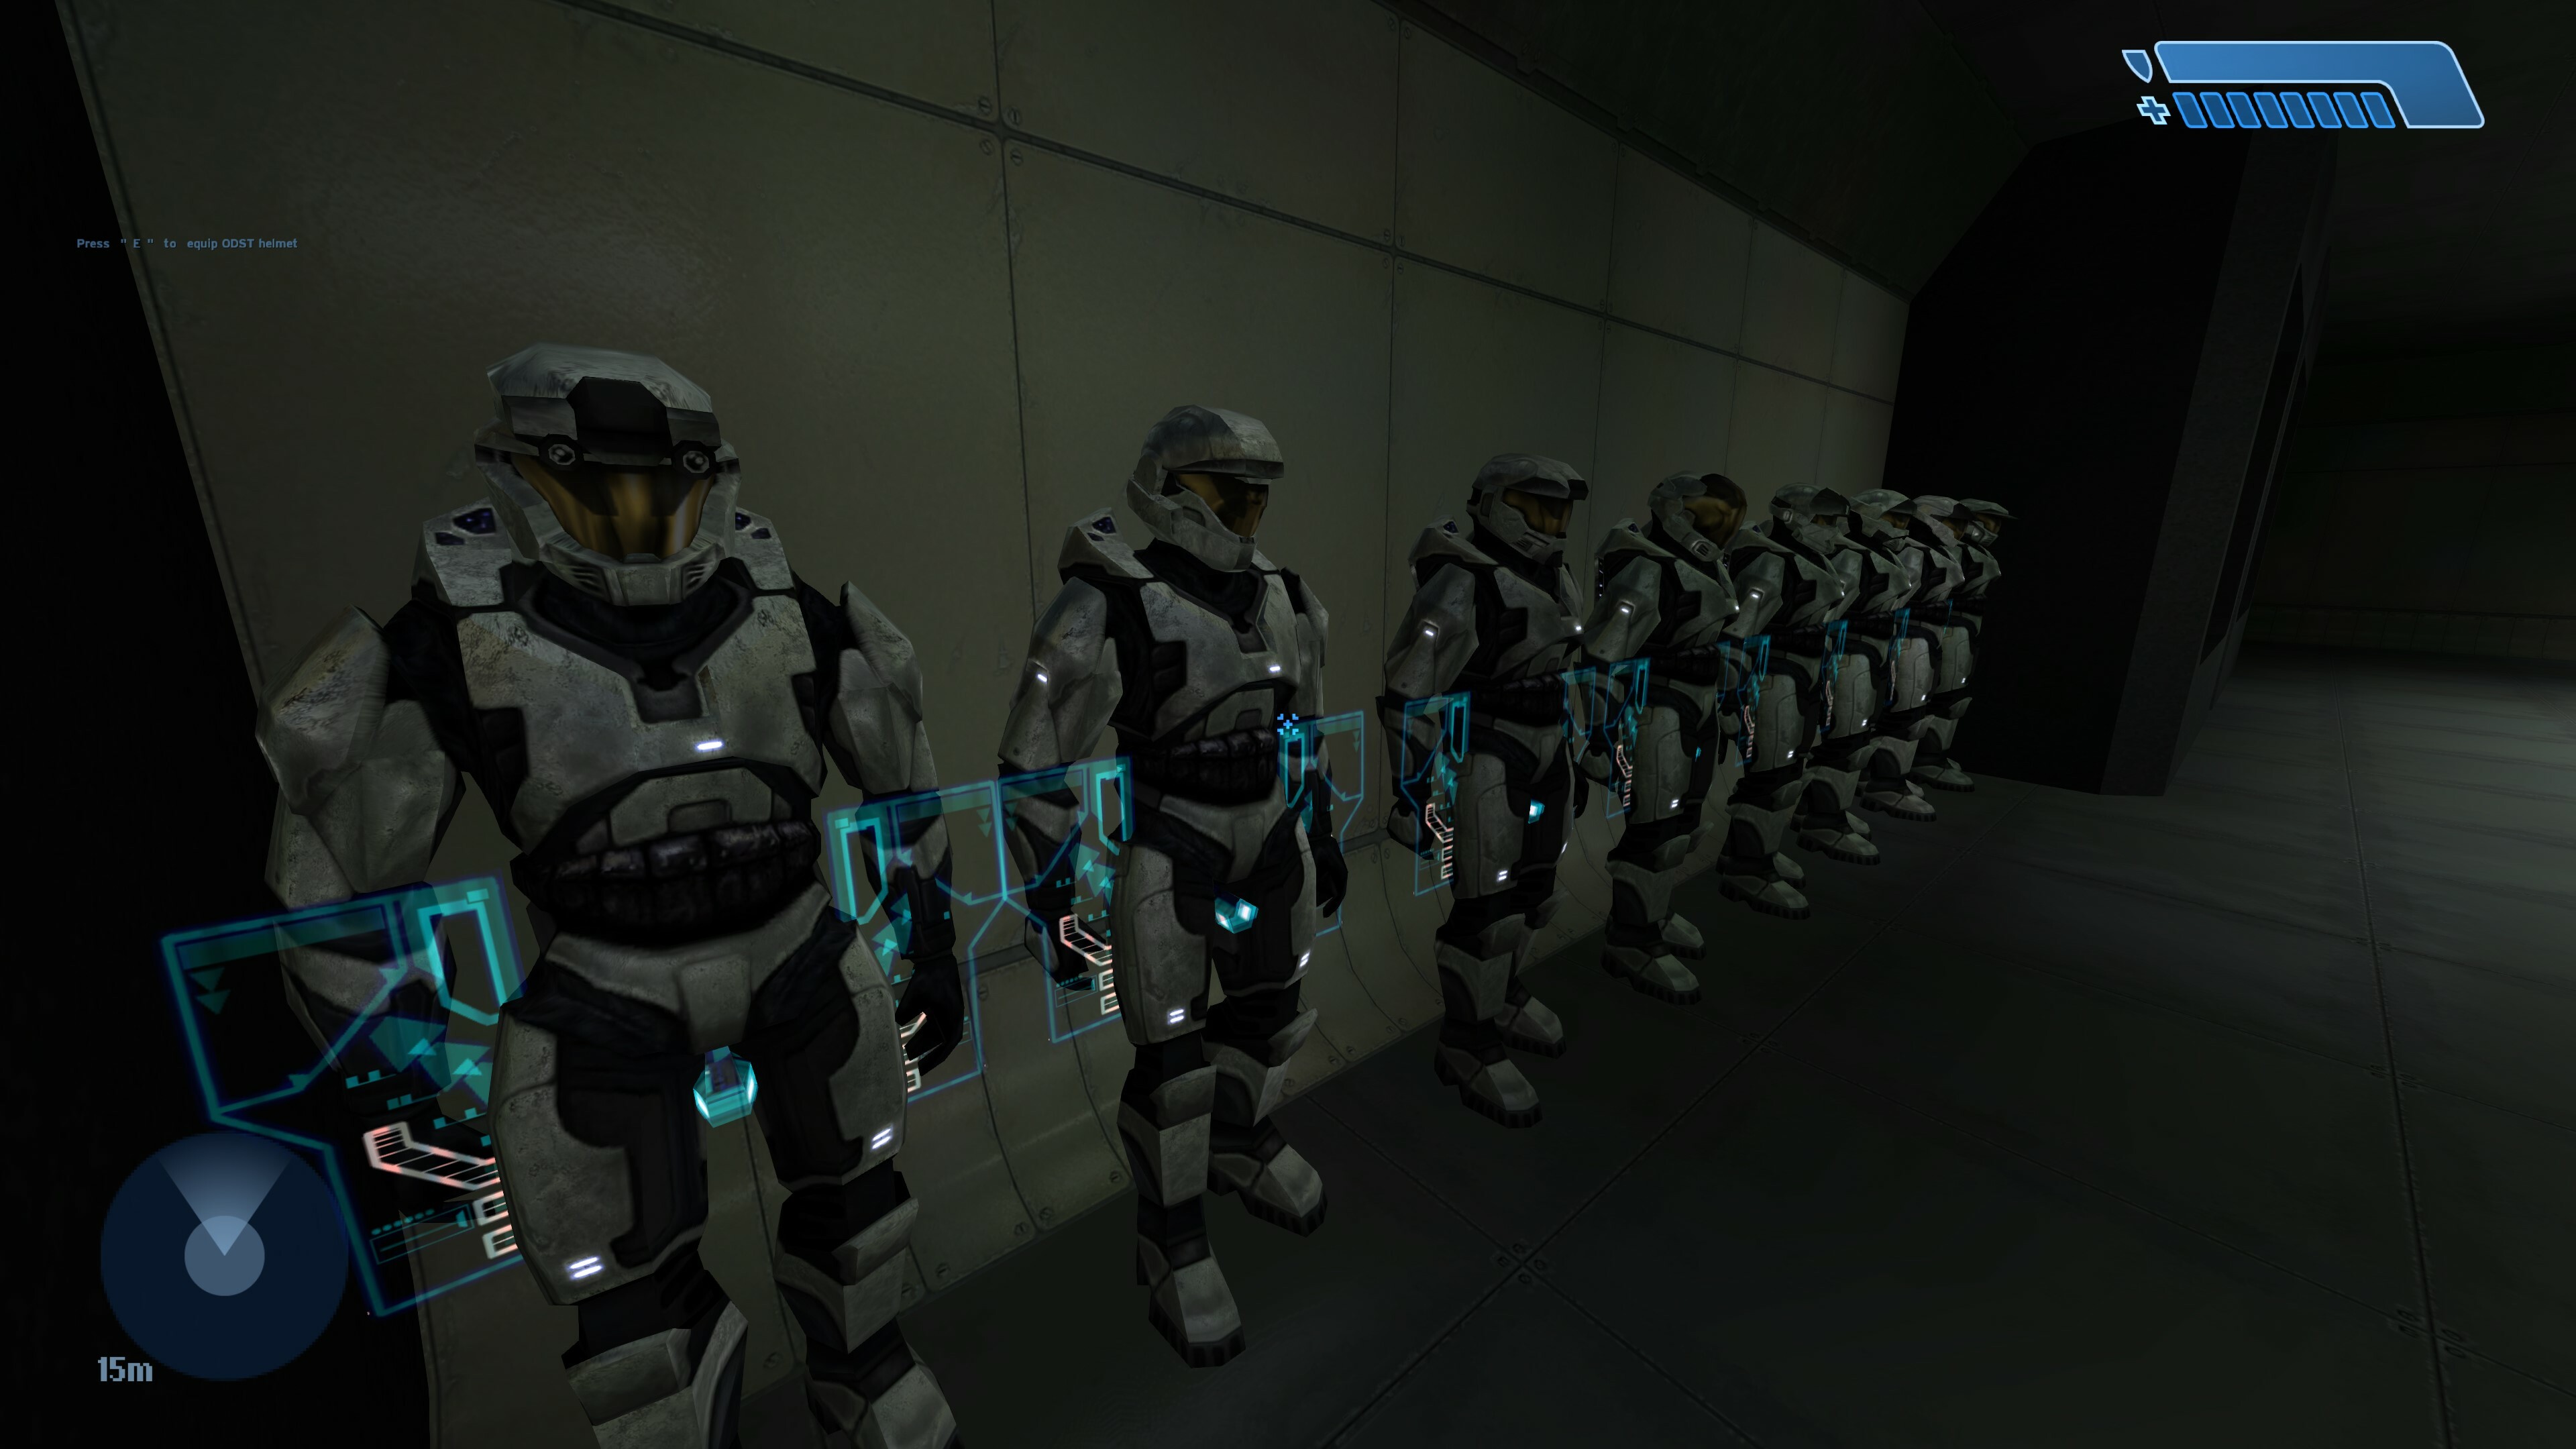 Halo on X: Prepare to join the hunt, Spartans. Season 2 of Halo